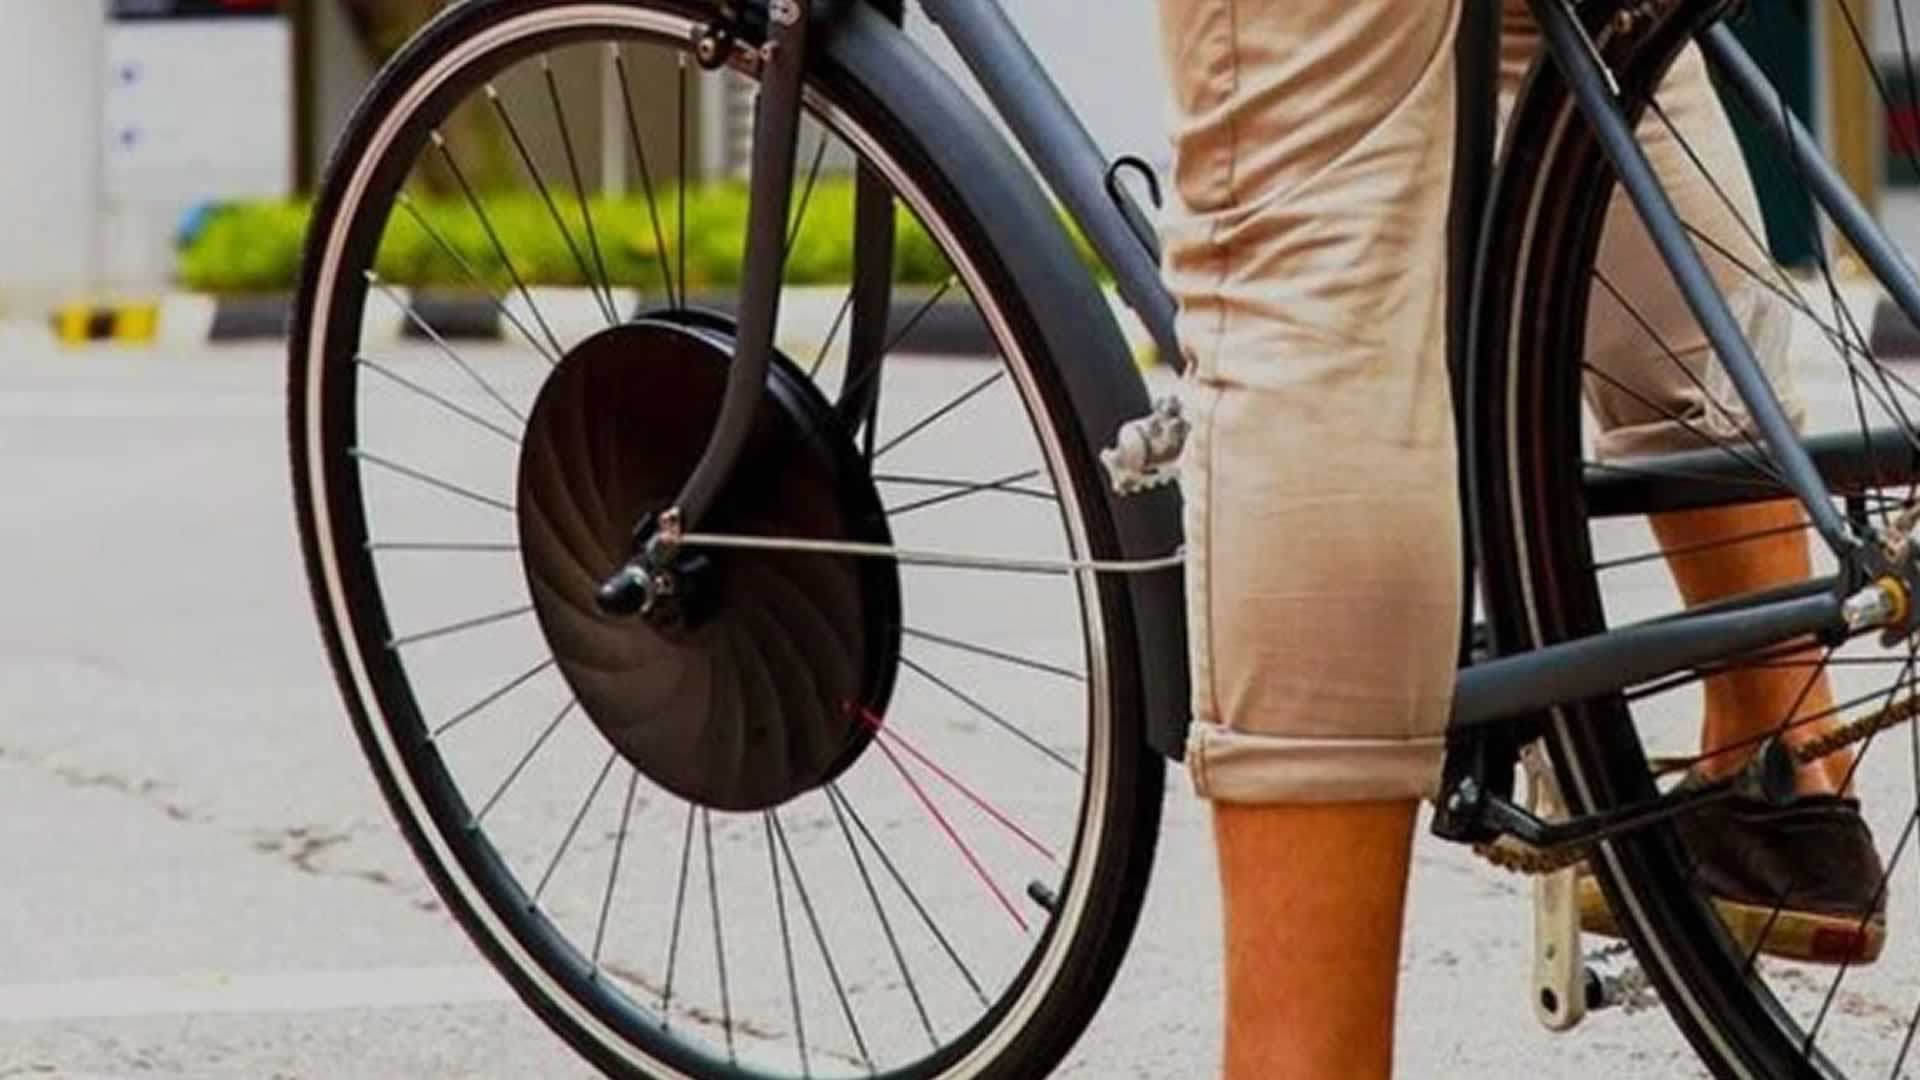 Convert the Bicycle to Electric